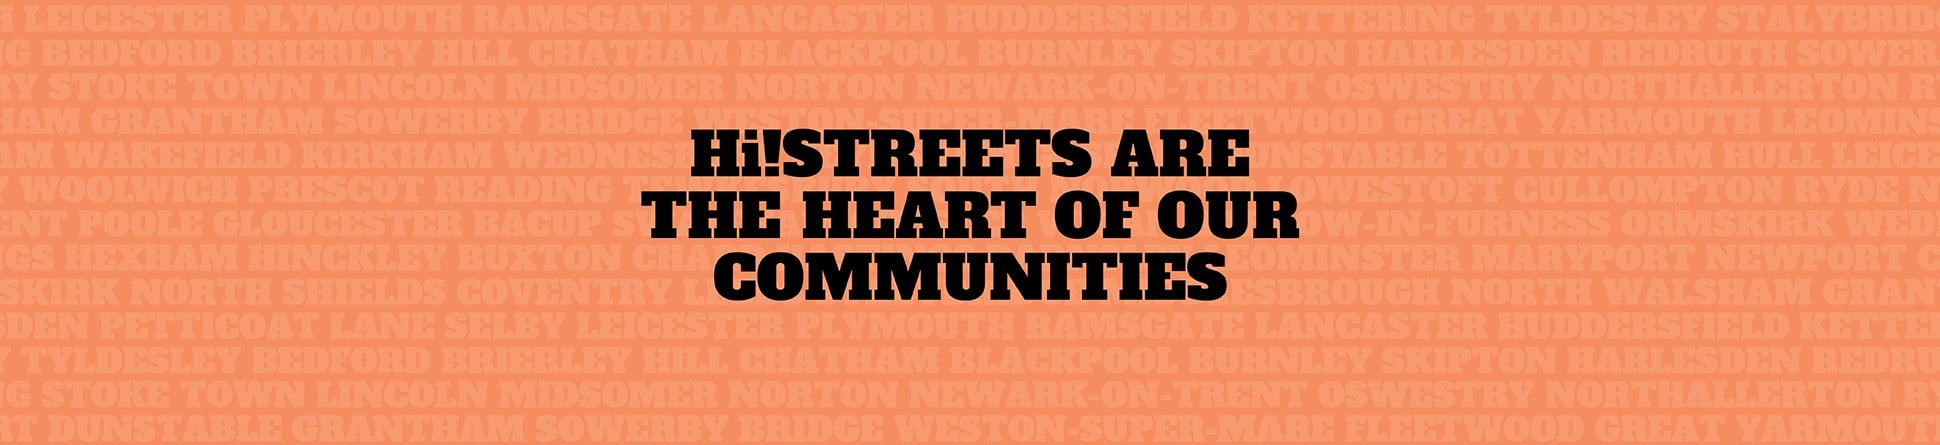 High Street Heritage Action Zone branded image with background text that lists all of the names of the 66 HSHAZs and foreground text in black that reads: HI!STREETS ARE THE HEART OF OUR COMMUNITIES